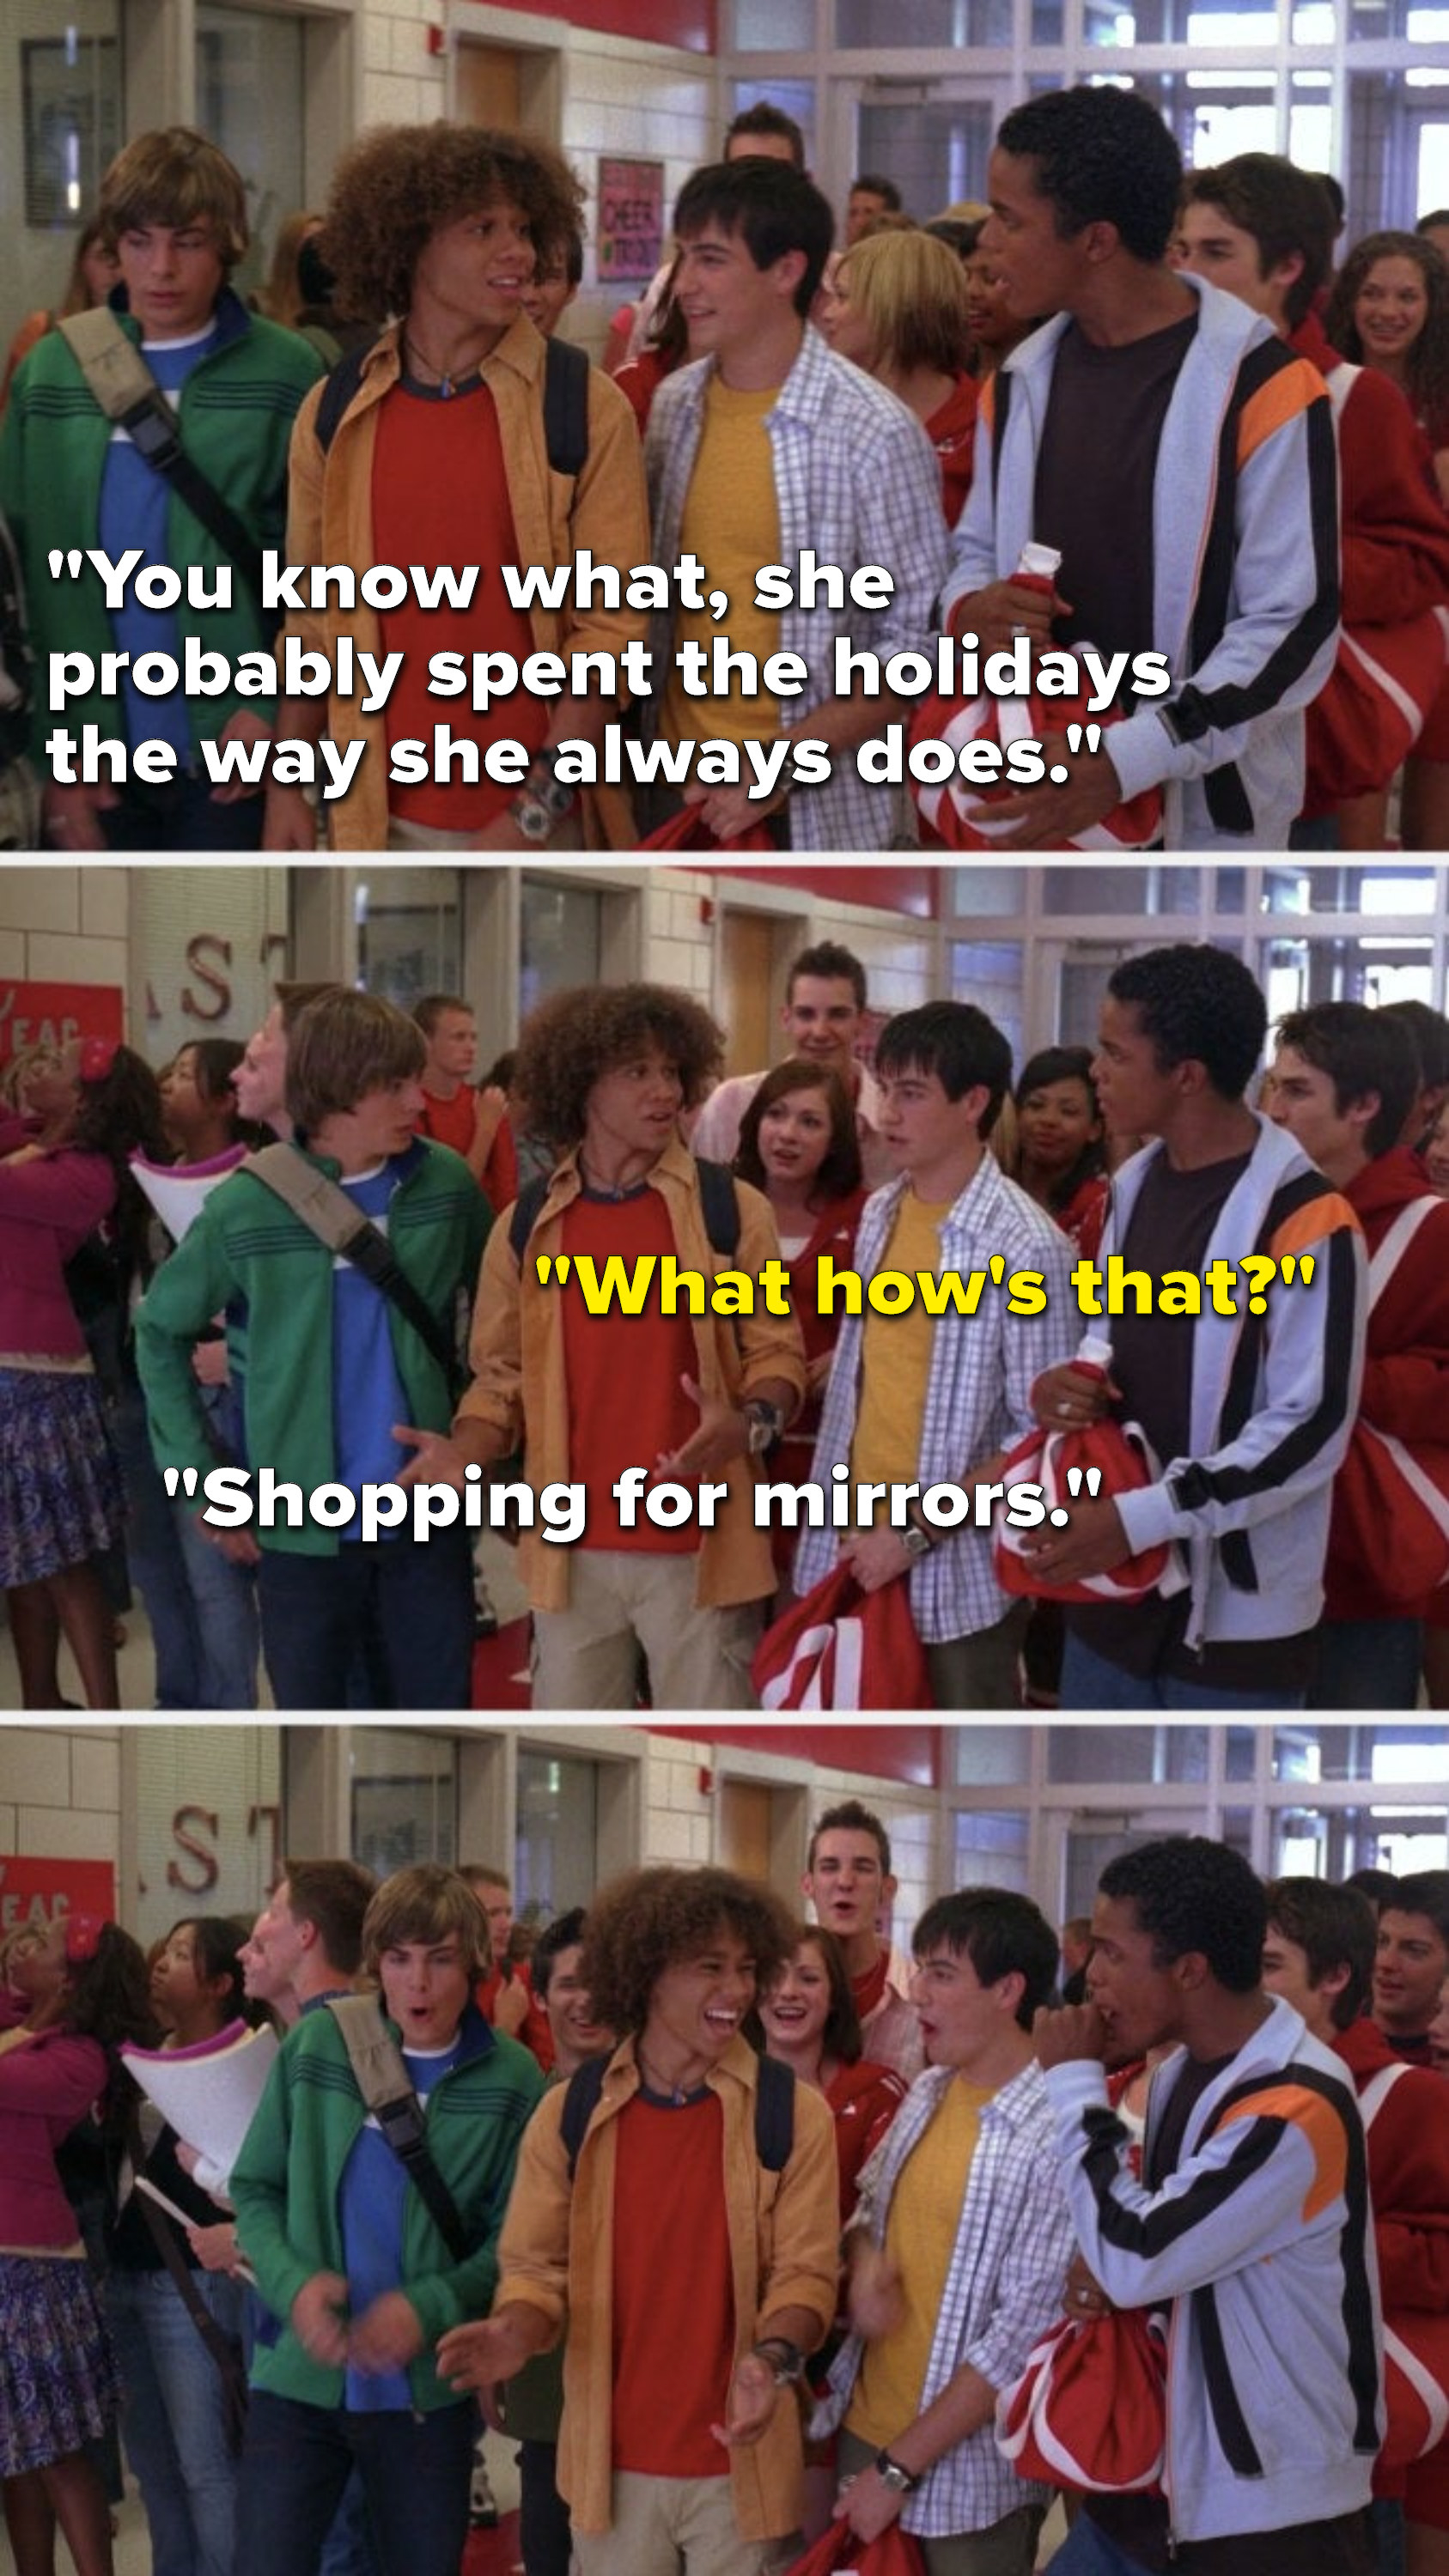 Chad says, &quot;You know what, she probably spent the holidays the way she always does,&quot; Jason says, &quot;What how&#x27;s that,&quot; Chad says, &quot;Shopping for mirrors&quot; and everyone loves it